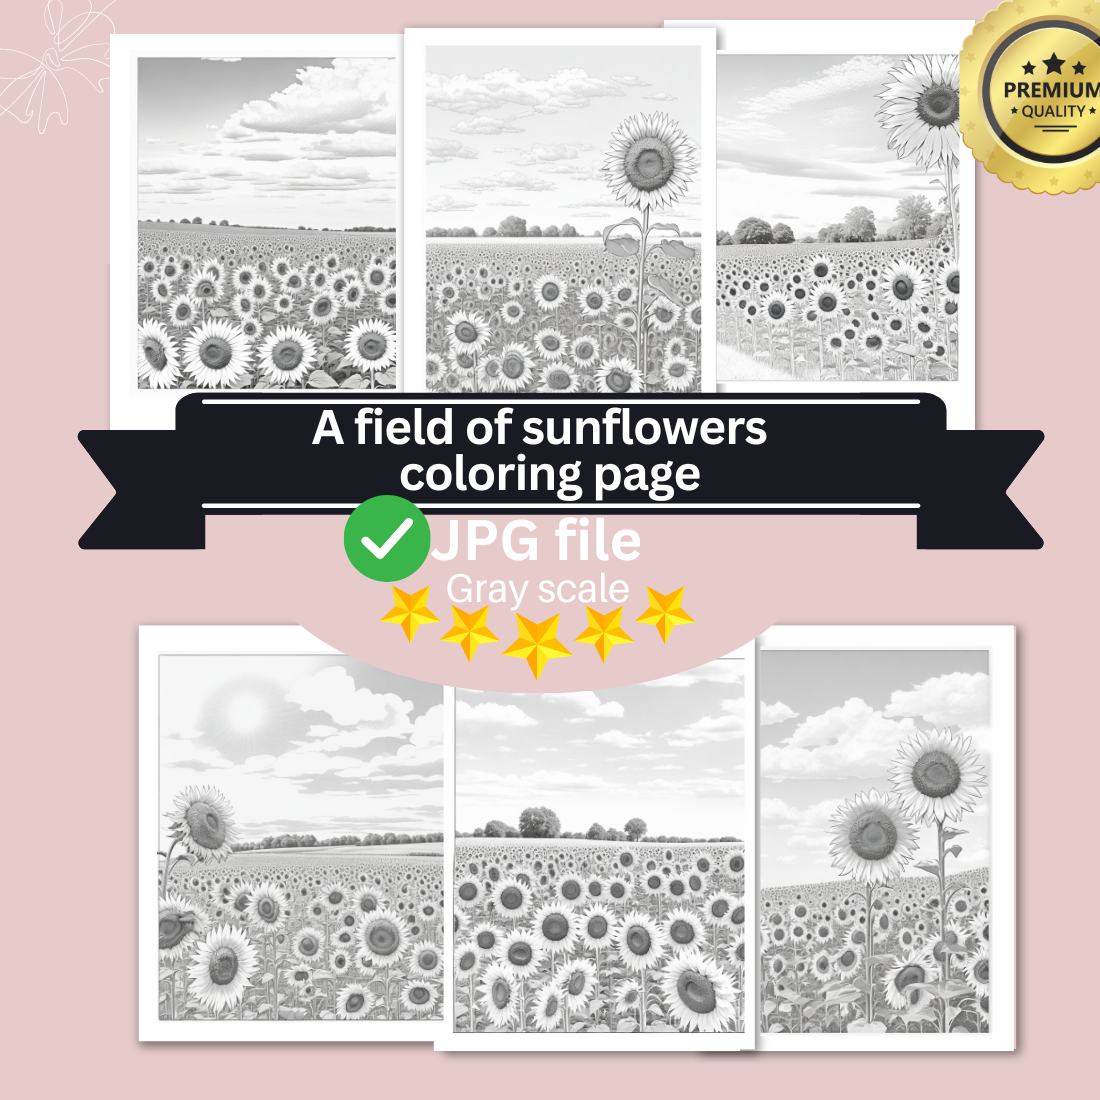 A field of sunflowers with a blue sky and white clouds coloring page cover image.